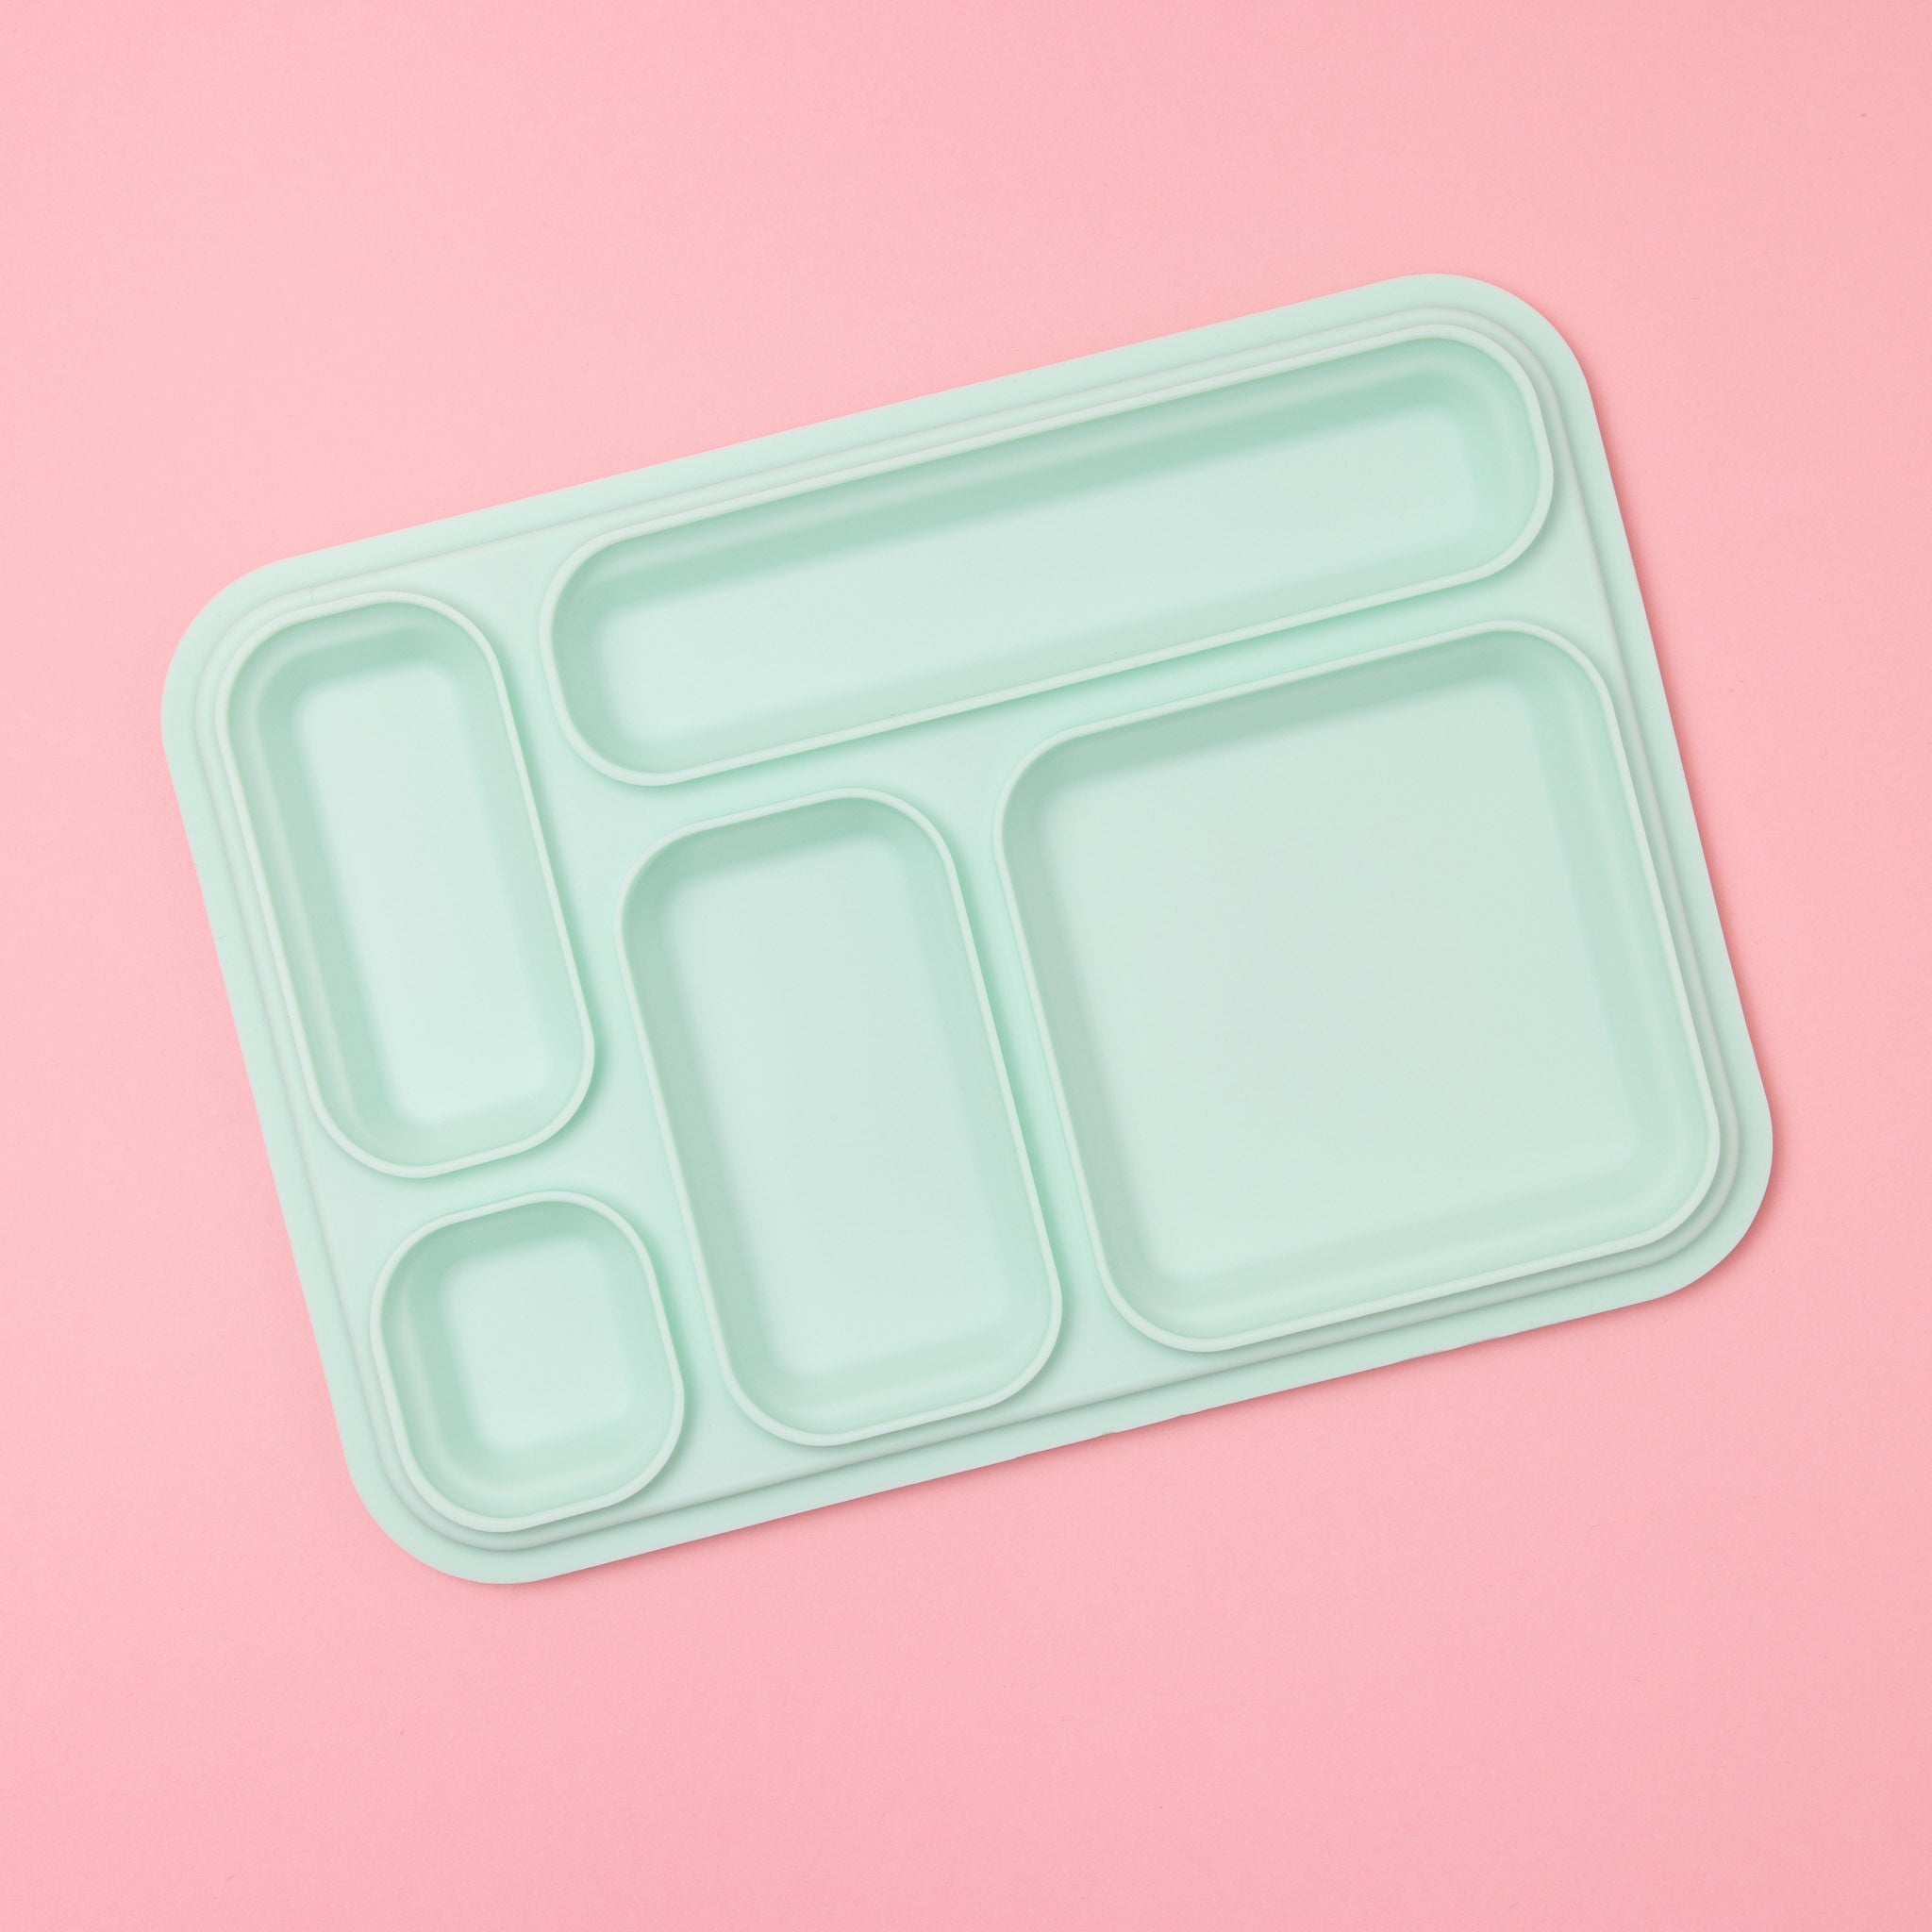 Mint Replacement Seal for Stainless Steel Lunch Box